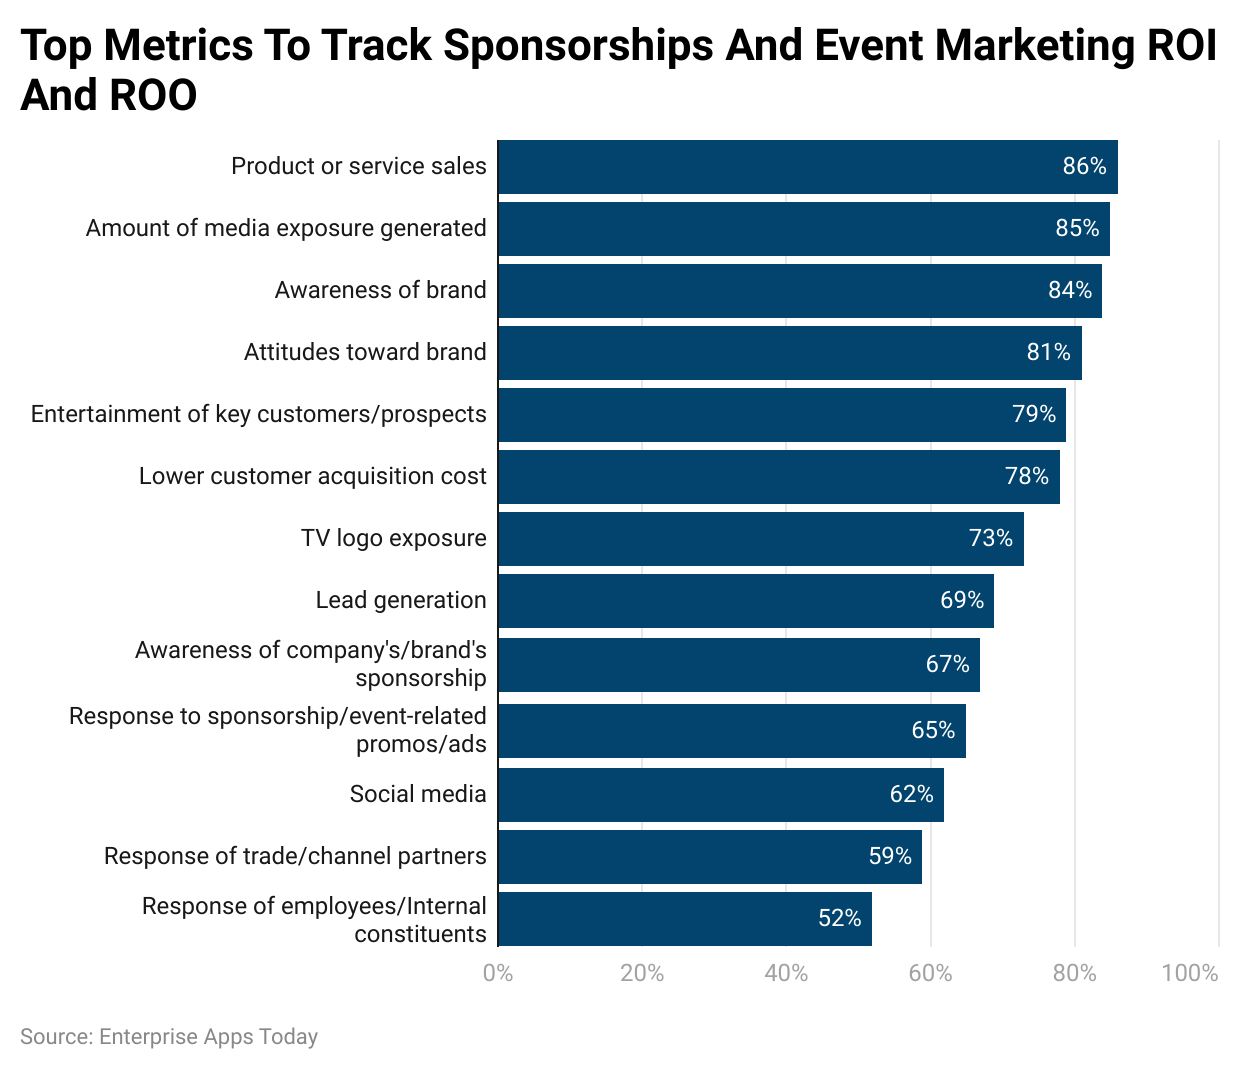 Top Metrics To Track Sponsorships And Event Marketing ROI And ROO